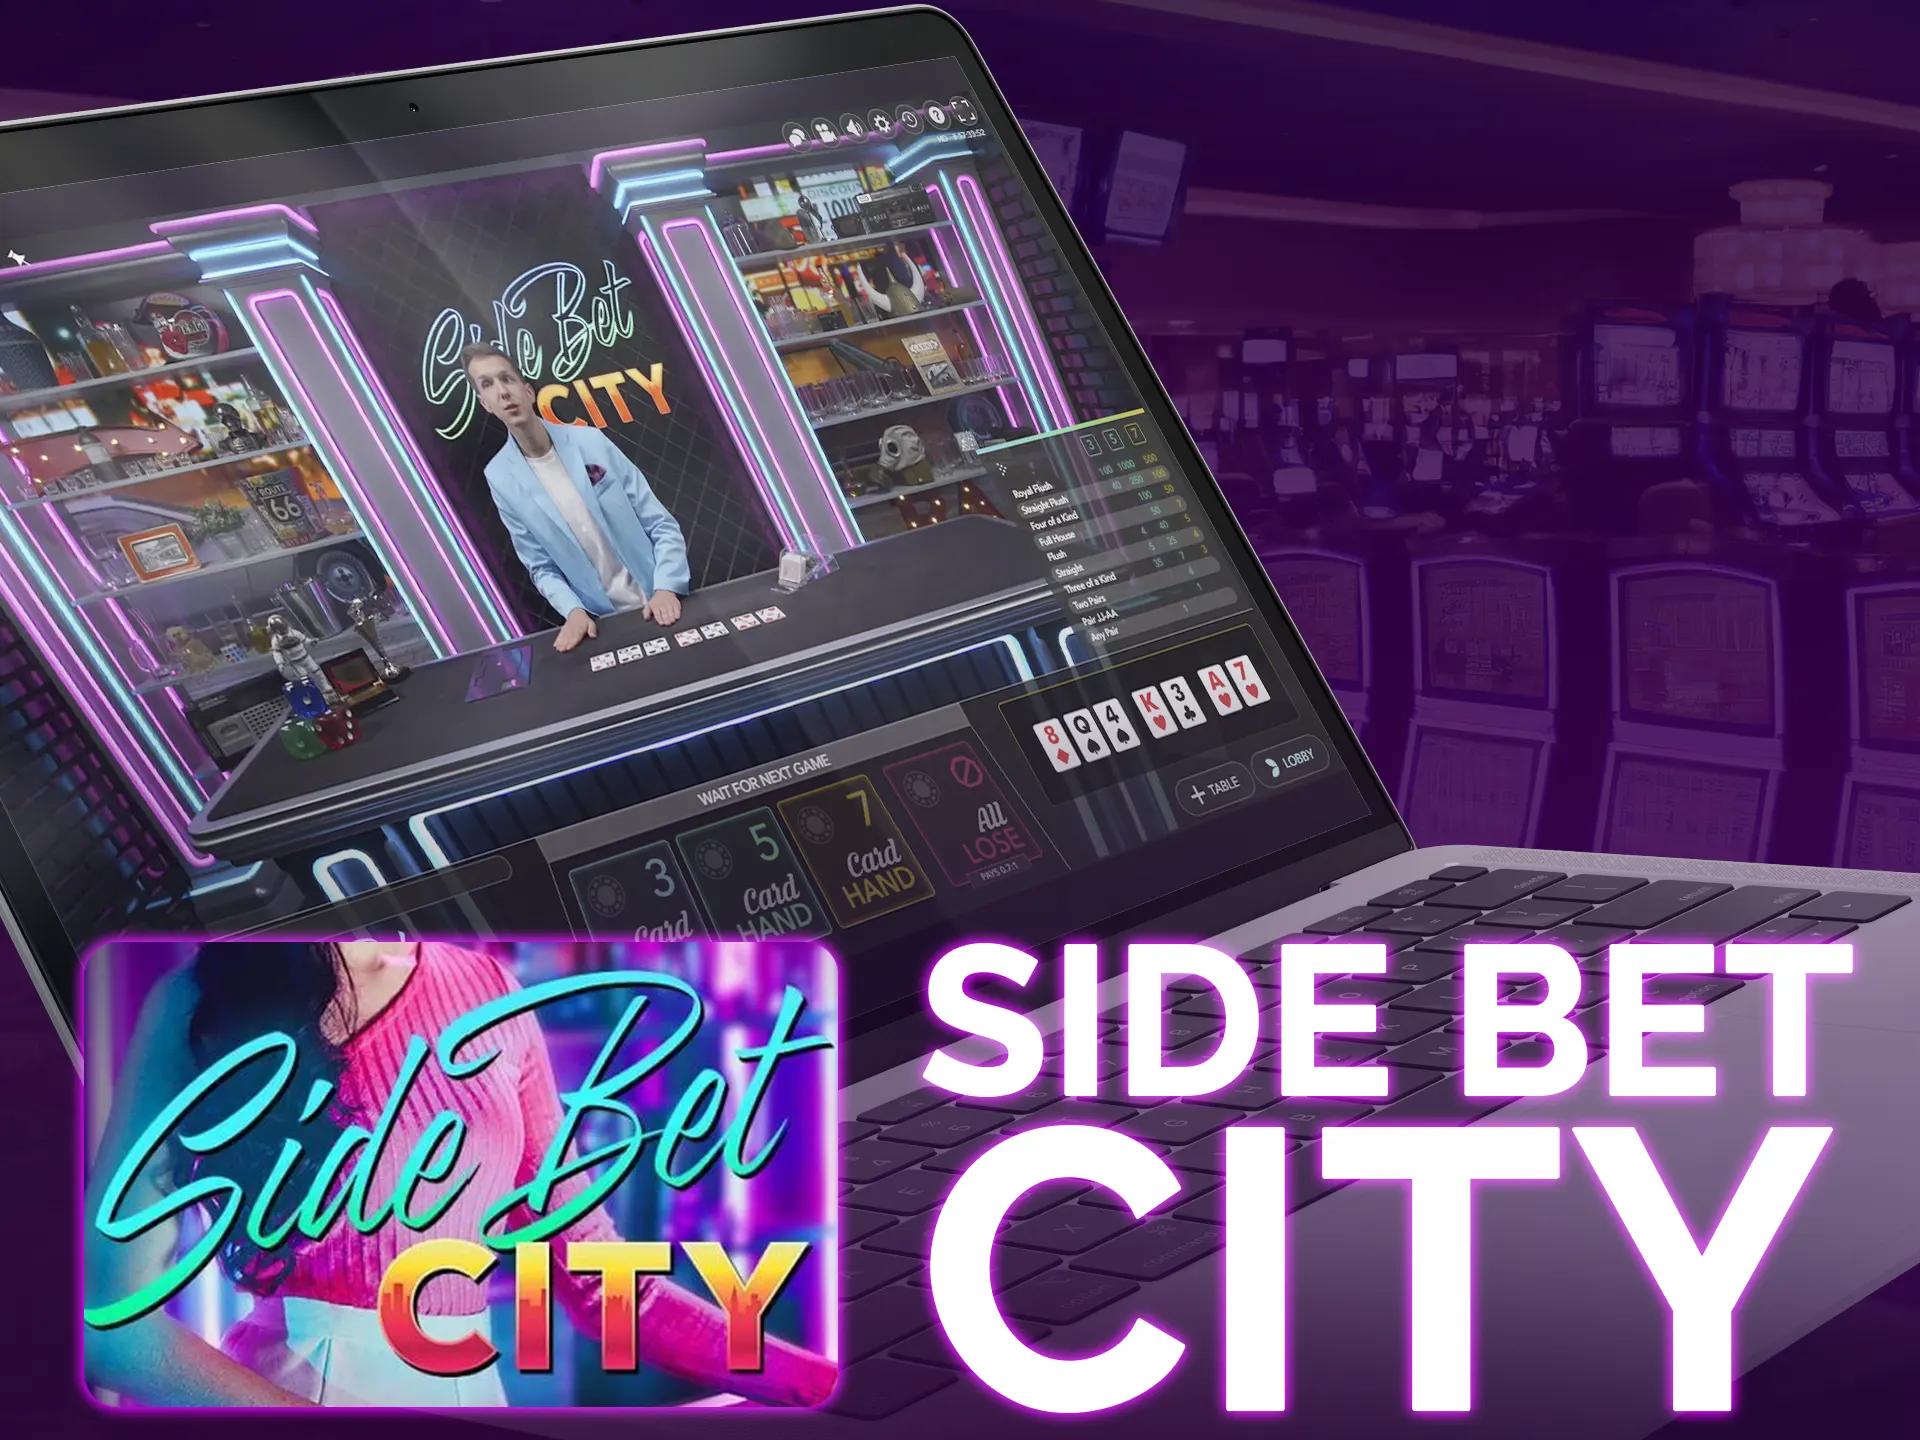 Side Bet city it`s a live dealer poker variation in a 80s-themed European studio. Exciting, high-quality gameplay.